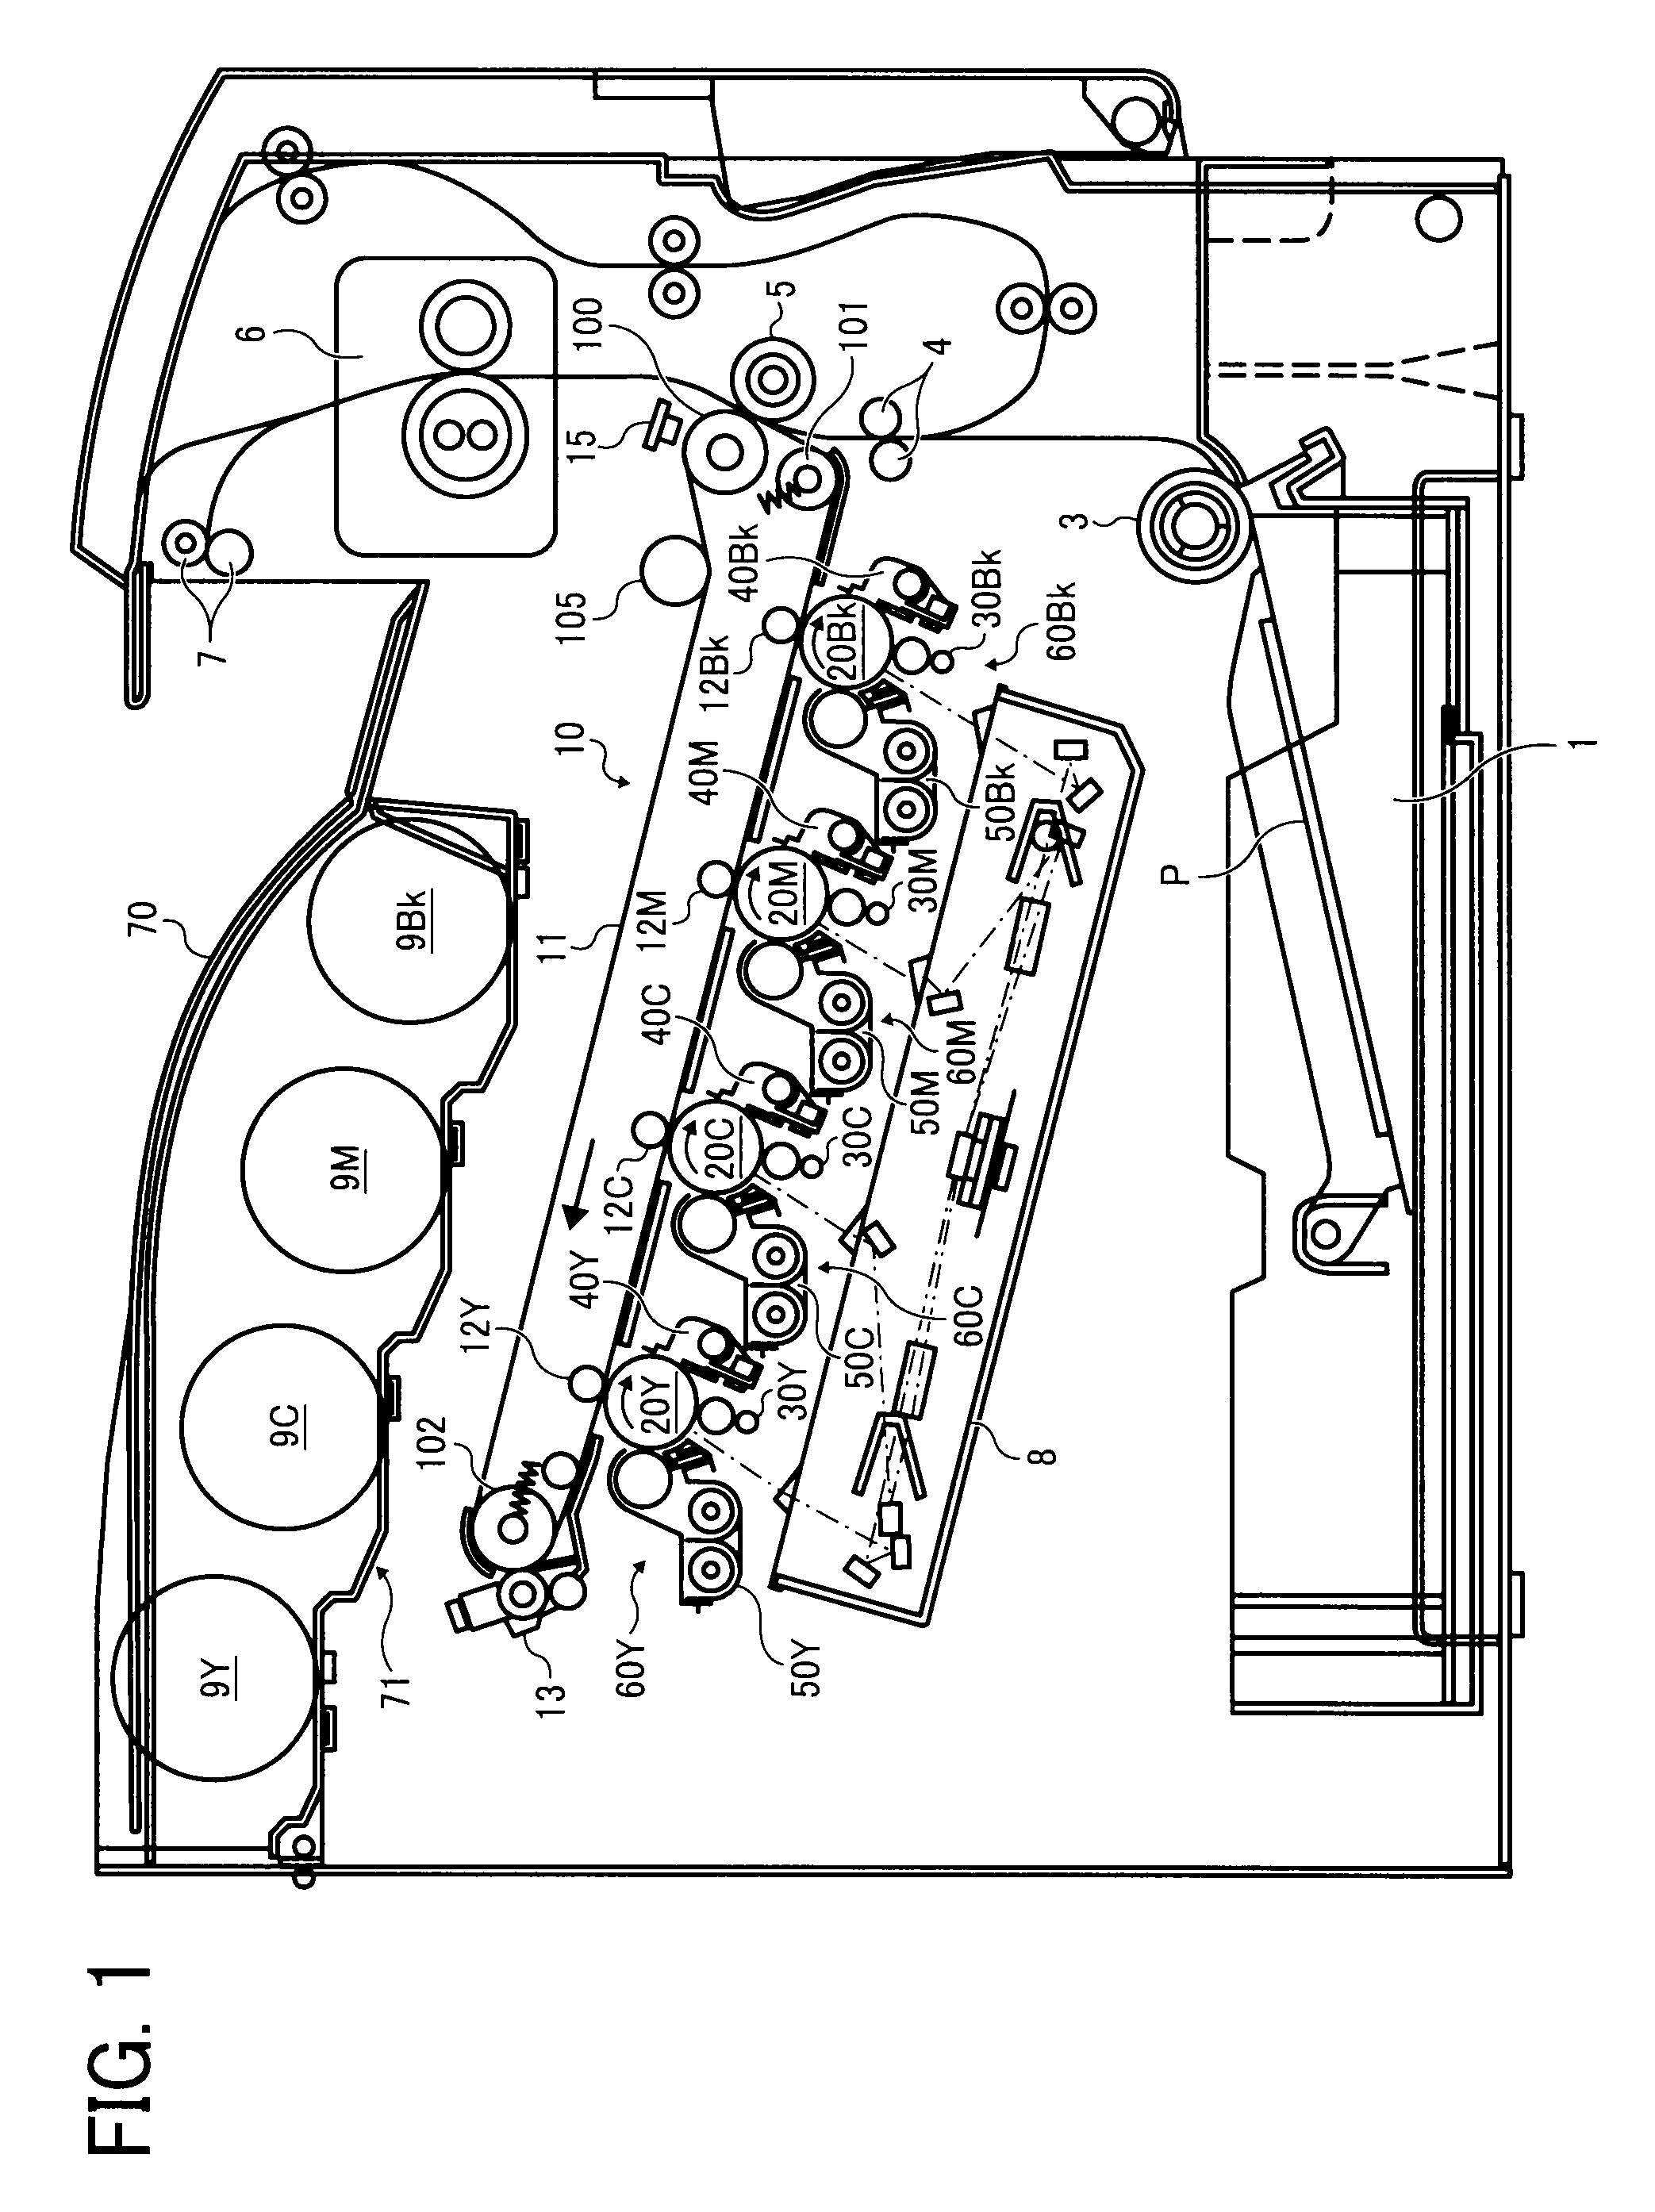 Transfer unit and image forming apparatus employing the transfer unit